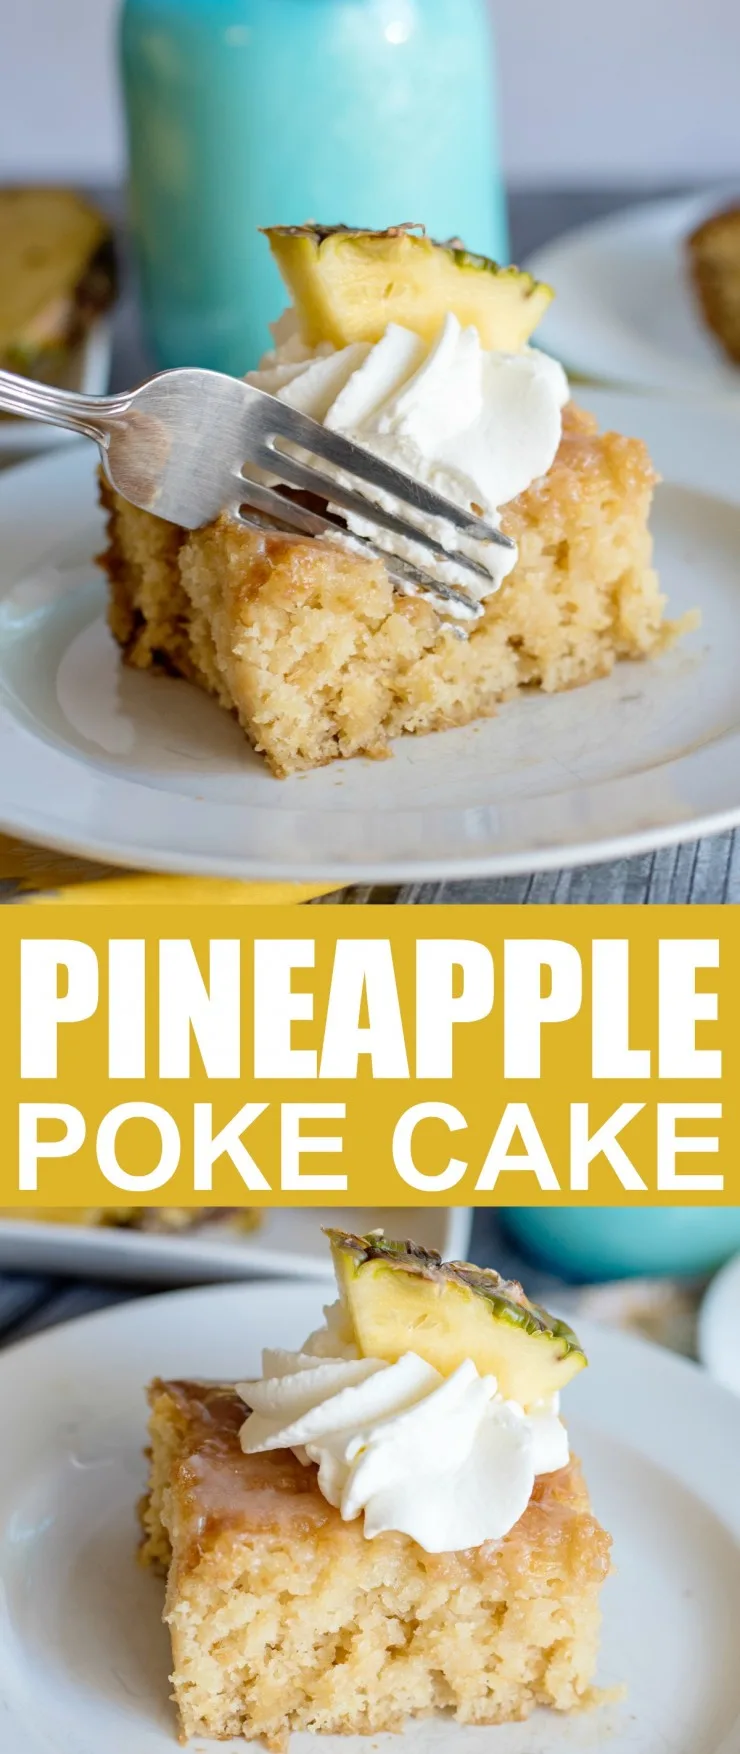 This Pineapple Poke Cake is packed full of tangy sweet flavour that is sure to be a summertime hit.